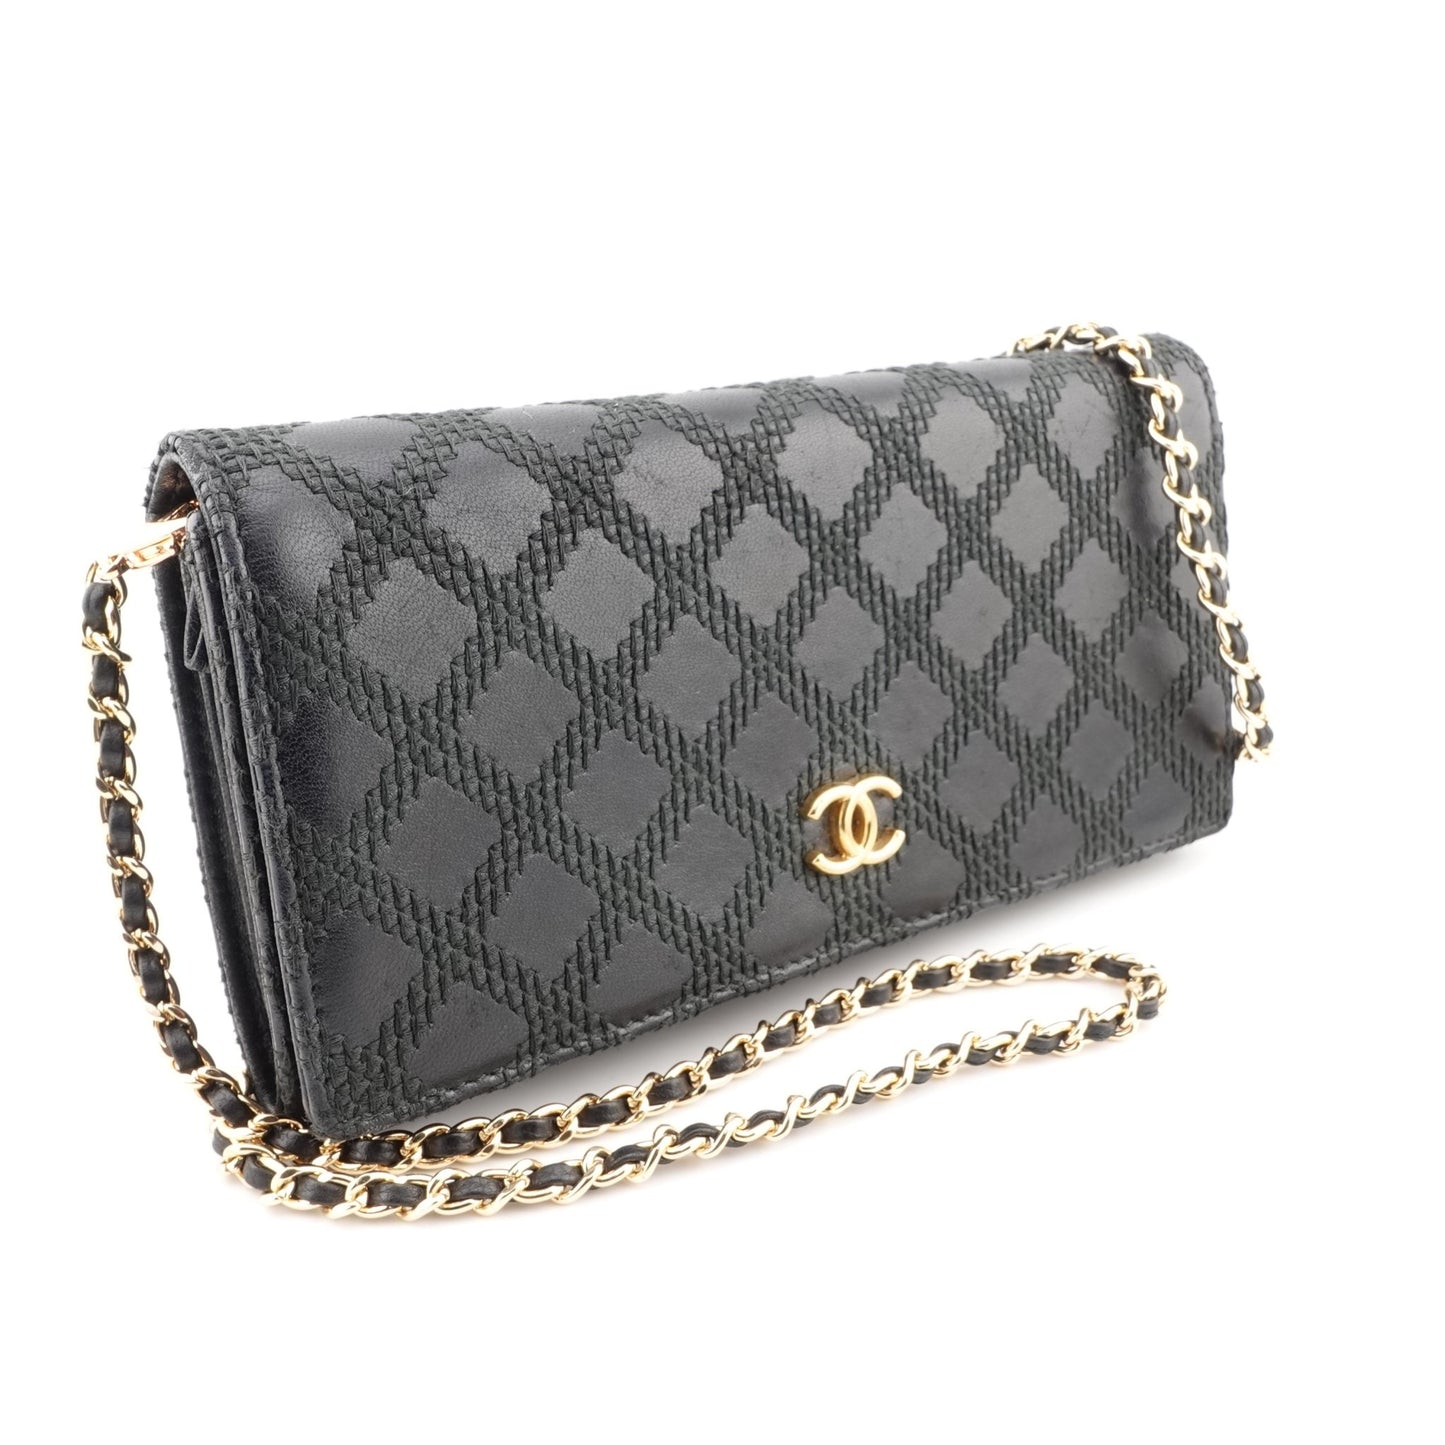 CHANEL Lambskin Ultra Stitch Quilted Full Flap Wallet with Chain - Bag Envy